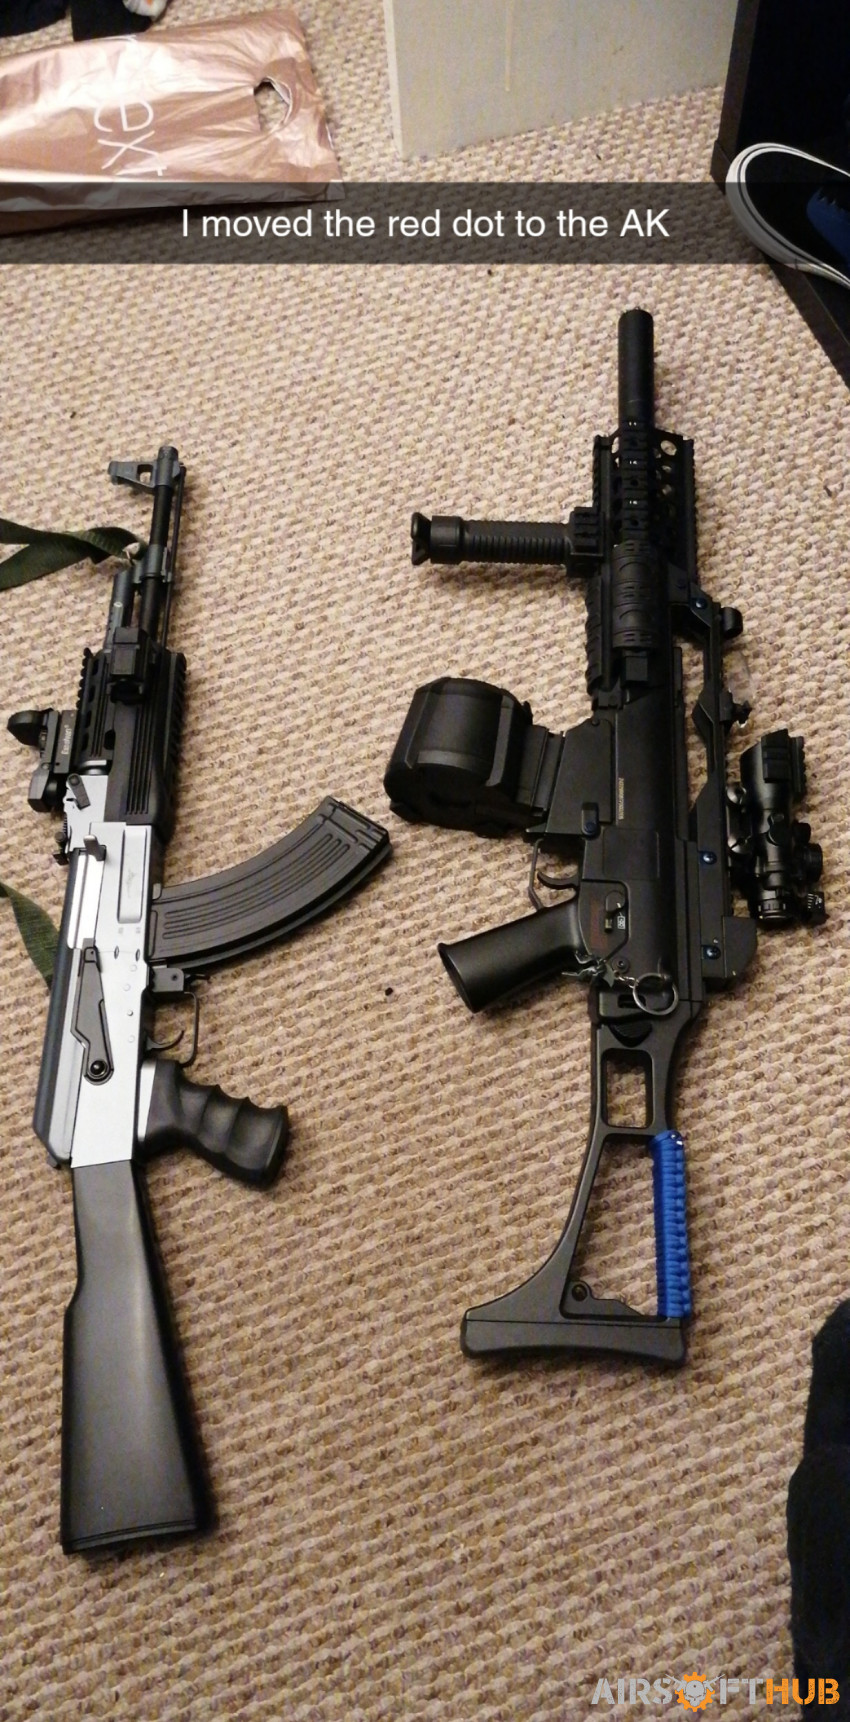 Cyma ak47 never fired - Used airsoft equipment